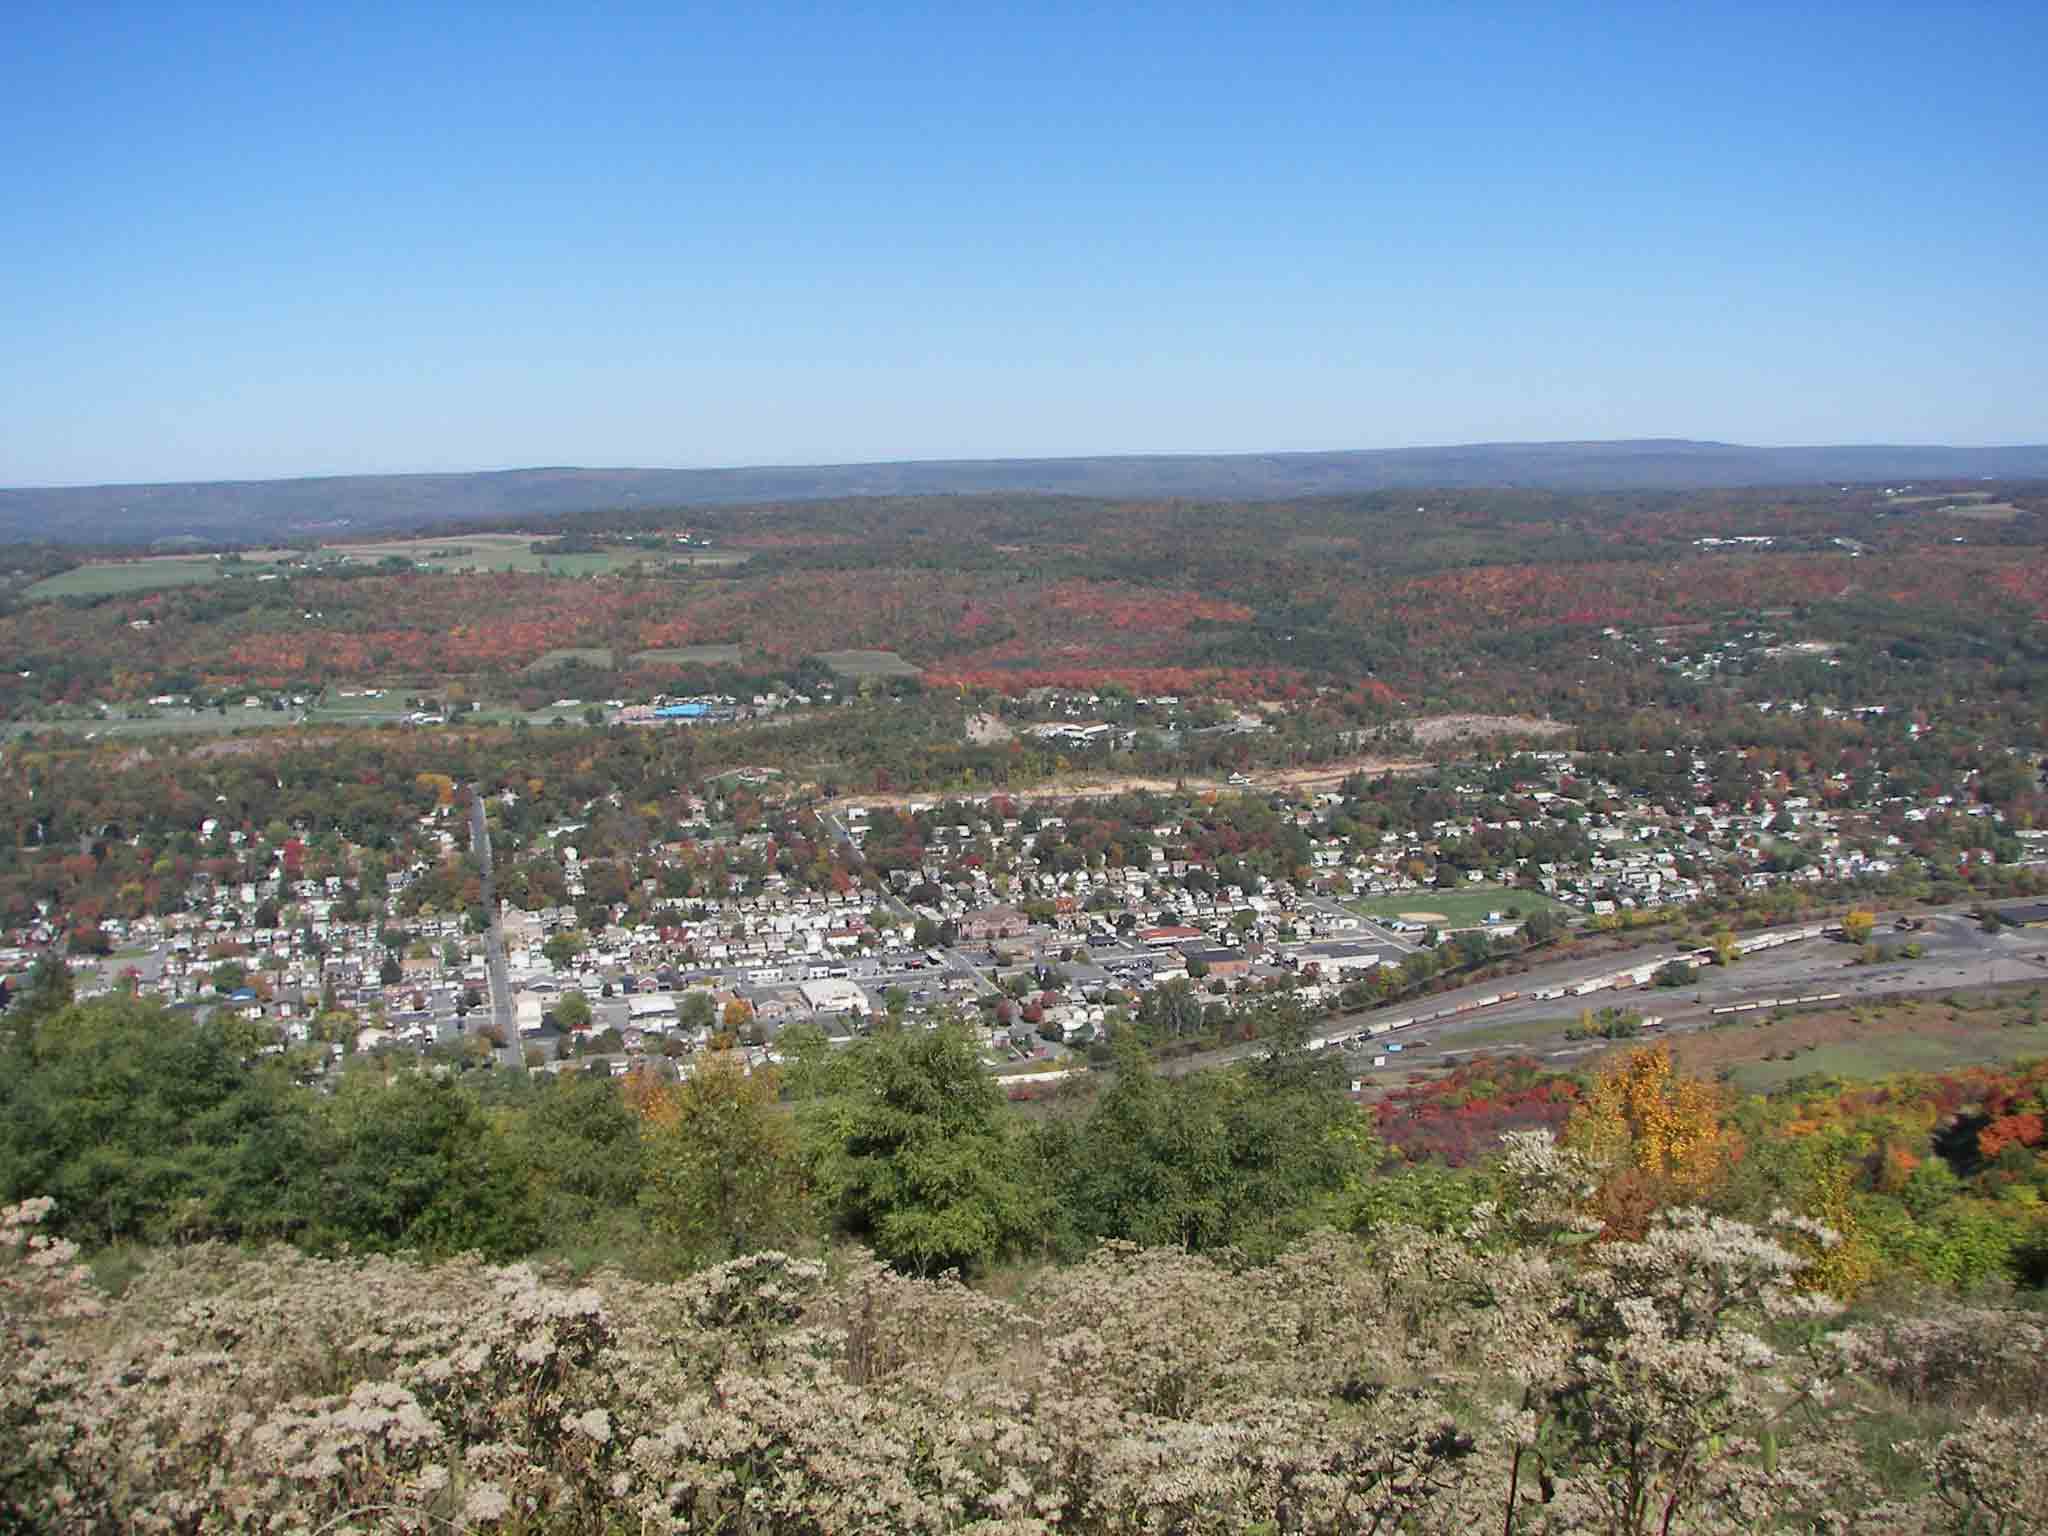 View of the town of Palmerton, PA  Courtesy jadams444@aol.com